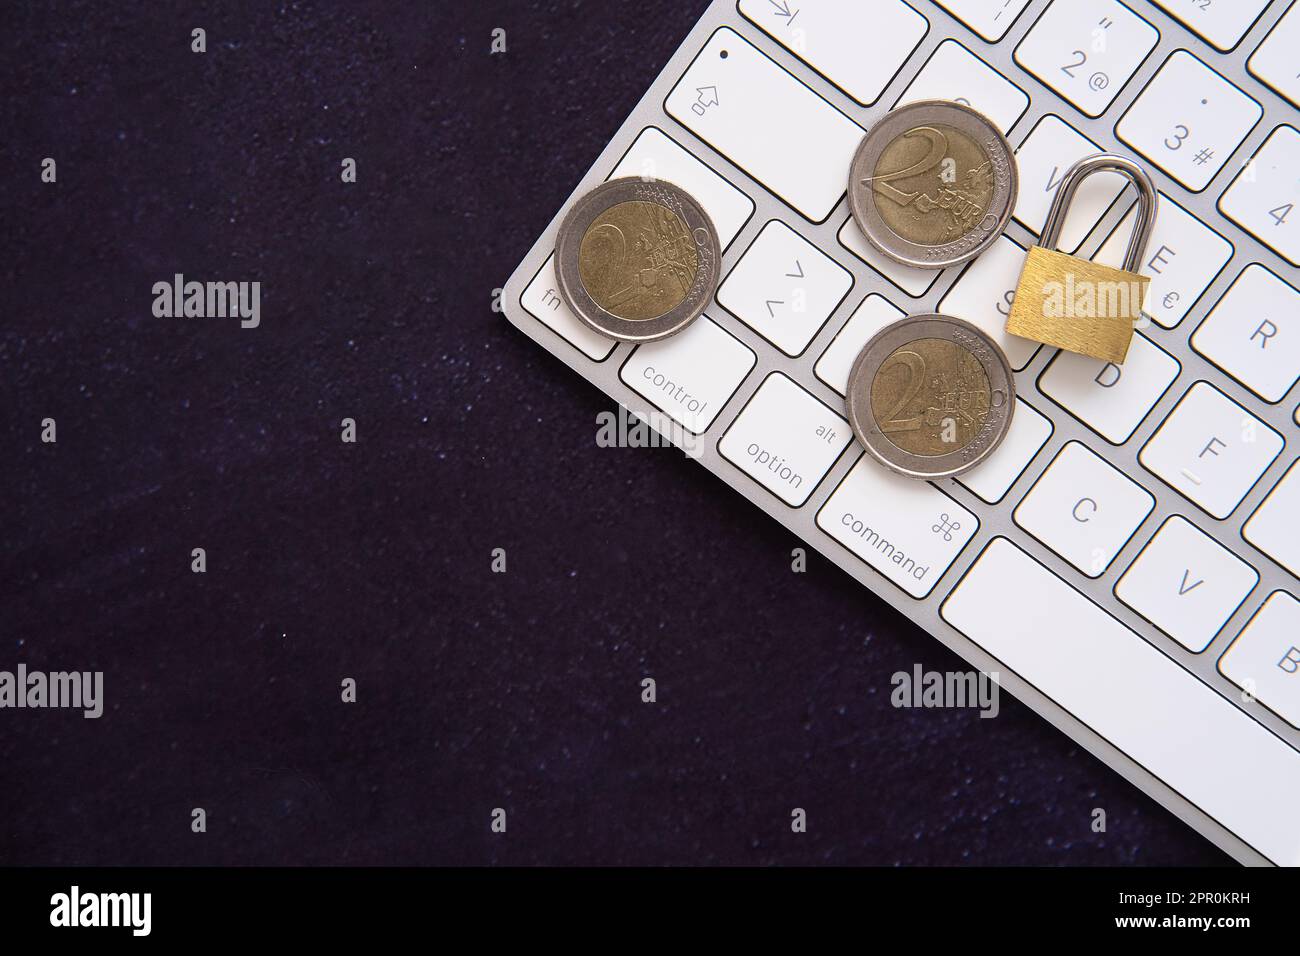 Closed padlock on some euro coins on a laptop frame. Keep our savings safe. Space for copy text. Dark background. Stock Photo